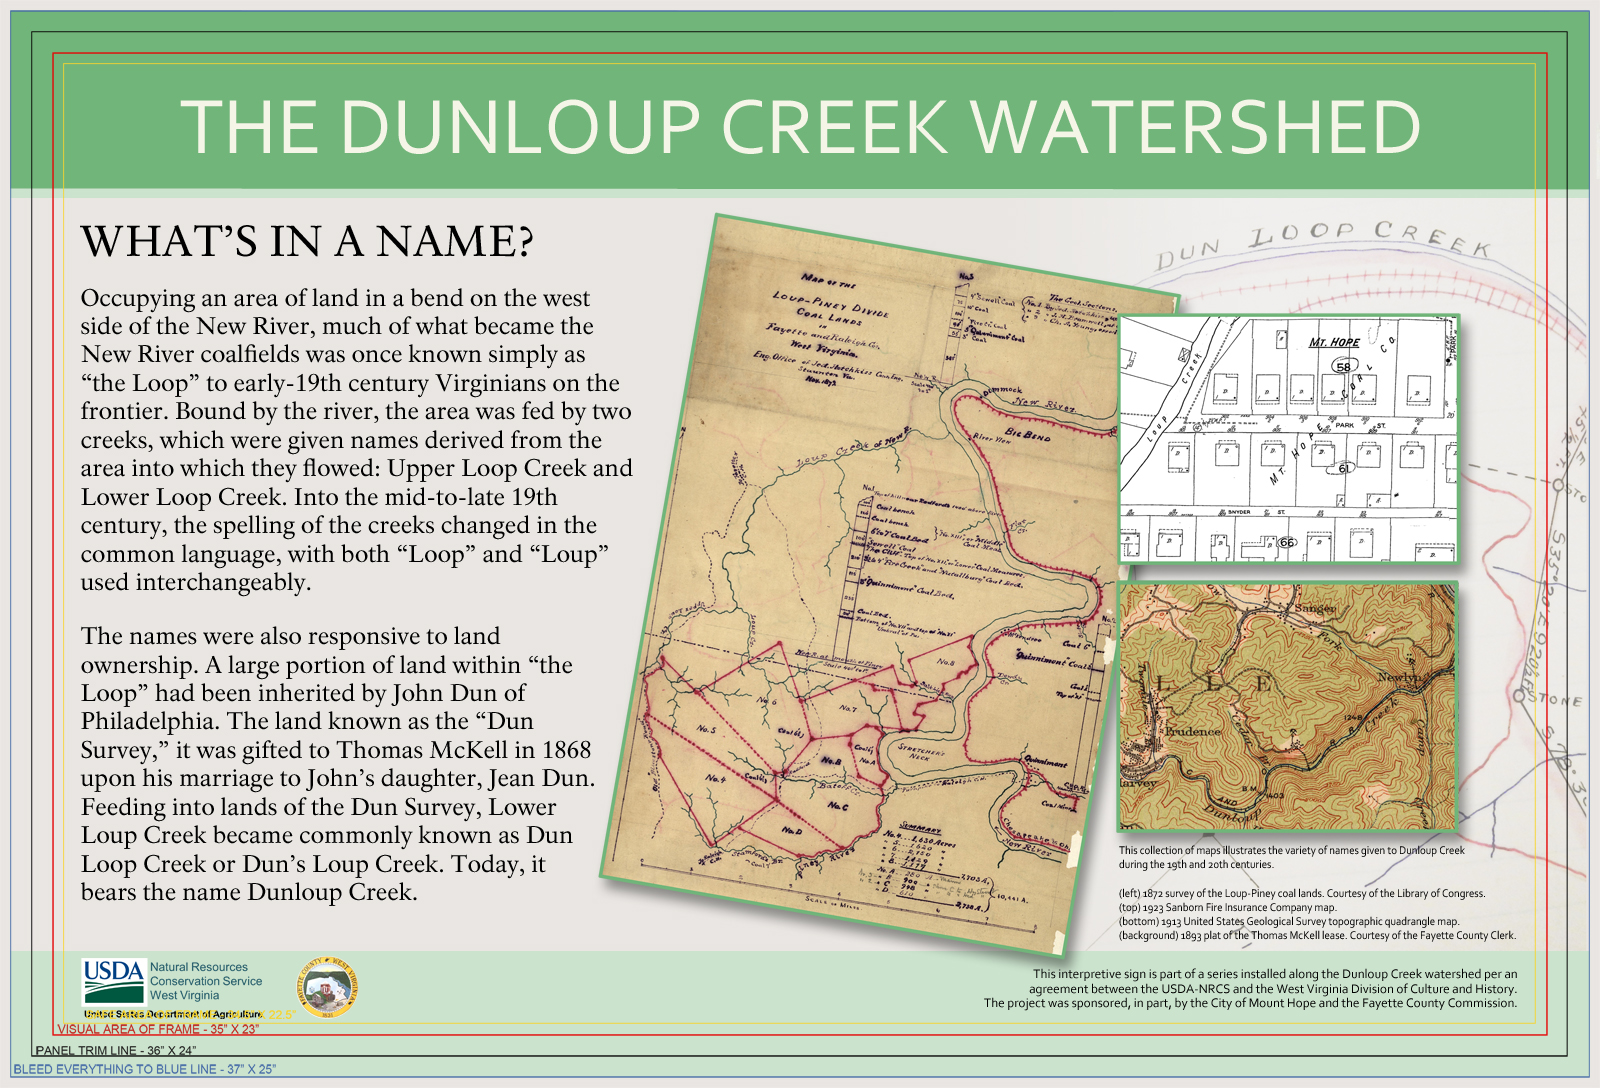 Infographic explaining the name of the Dunlop Creek Watershed.